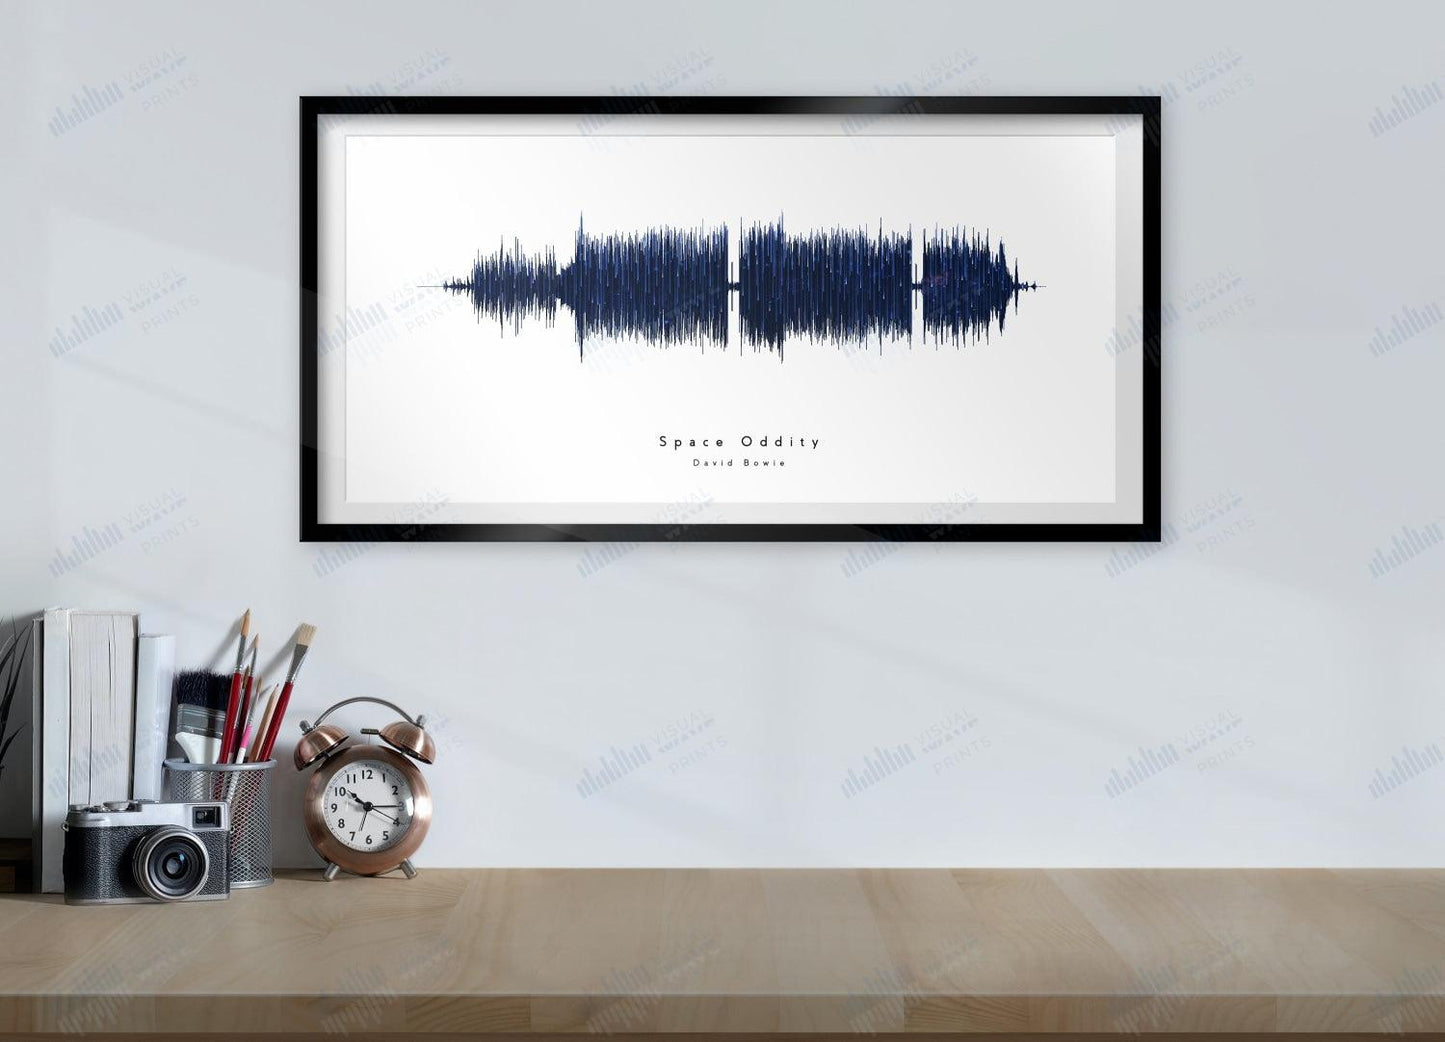 Space Oddity by David Bowie - Visual Wave Prints